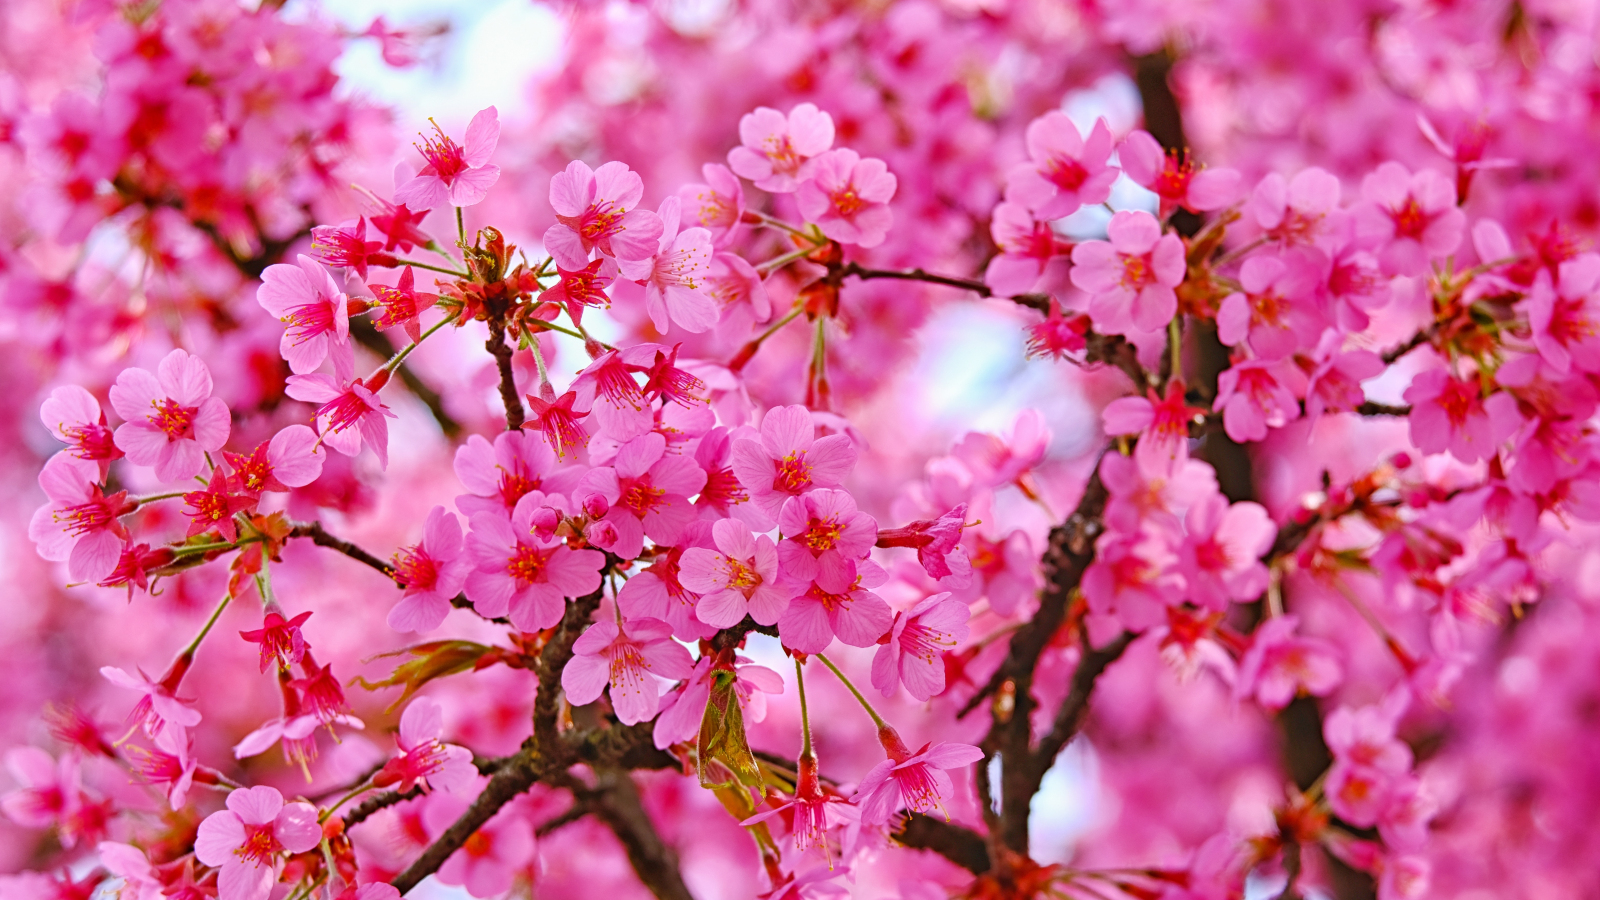 Download wallpaper 1600x900 cherry blossom, pink flowers, nature, 16:9  widescreen 1600x900 hd background, 21574